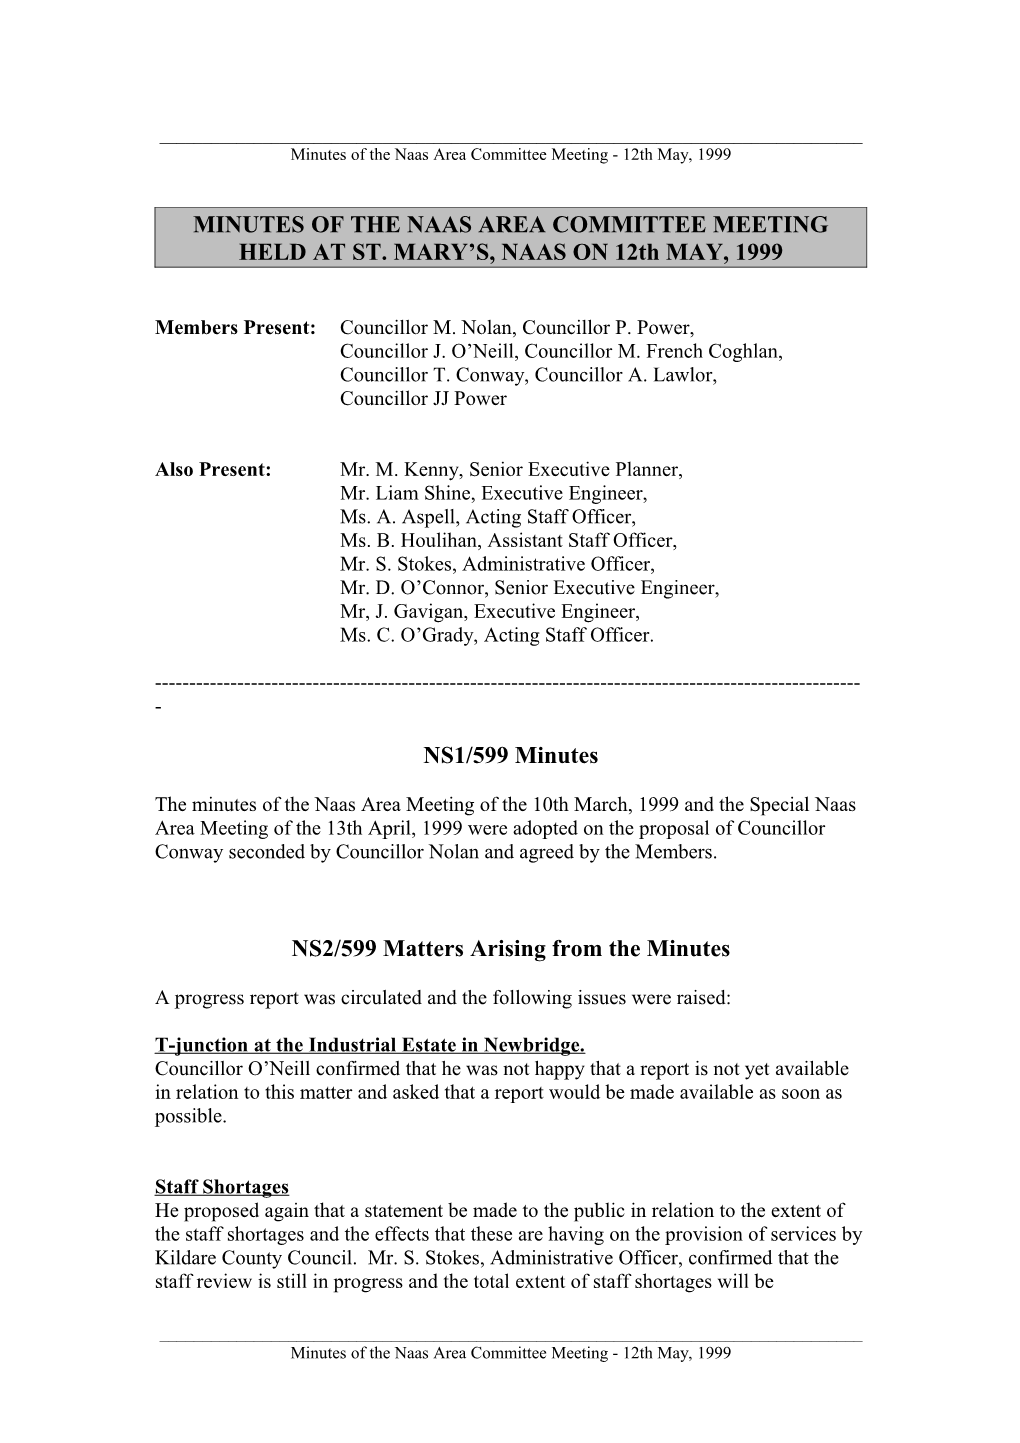 Minutes of the Naas Area Committee Meeting Held at St. Mary S, Naas on 12Th May, 1999